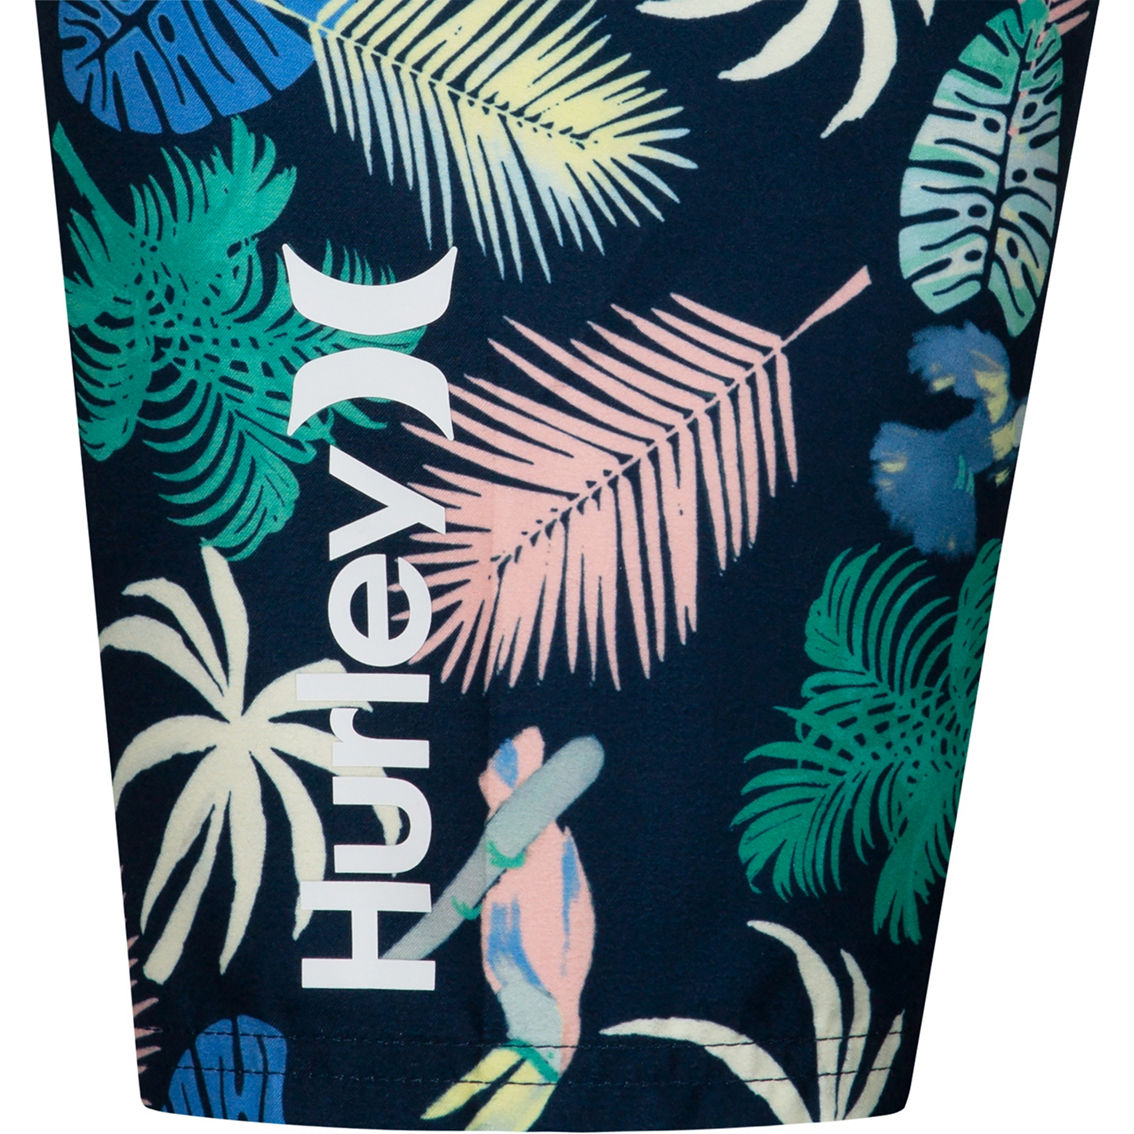 Hurley Little Boys Toucan Palm 2 pc. Swimsuit - Image 7 of 7